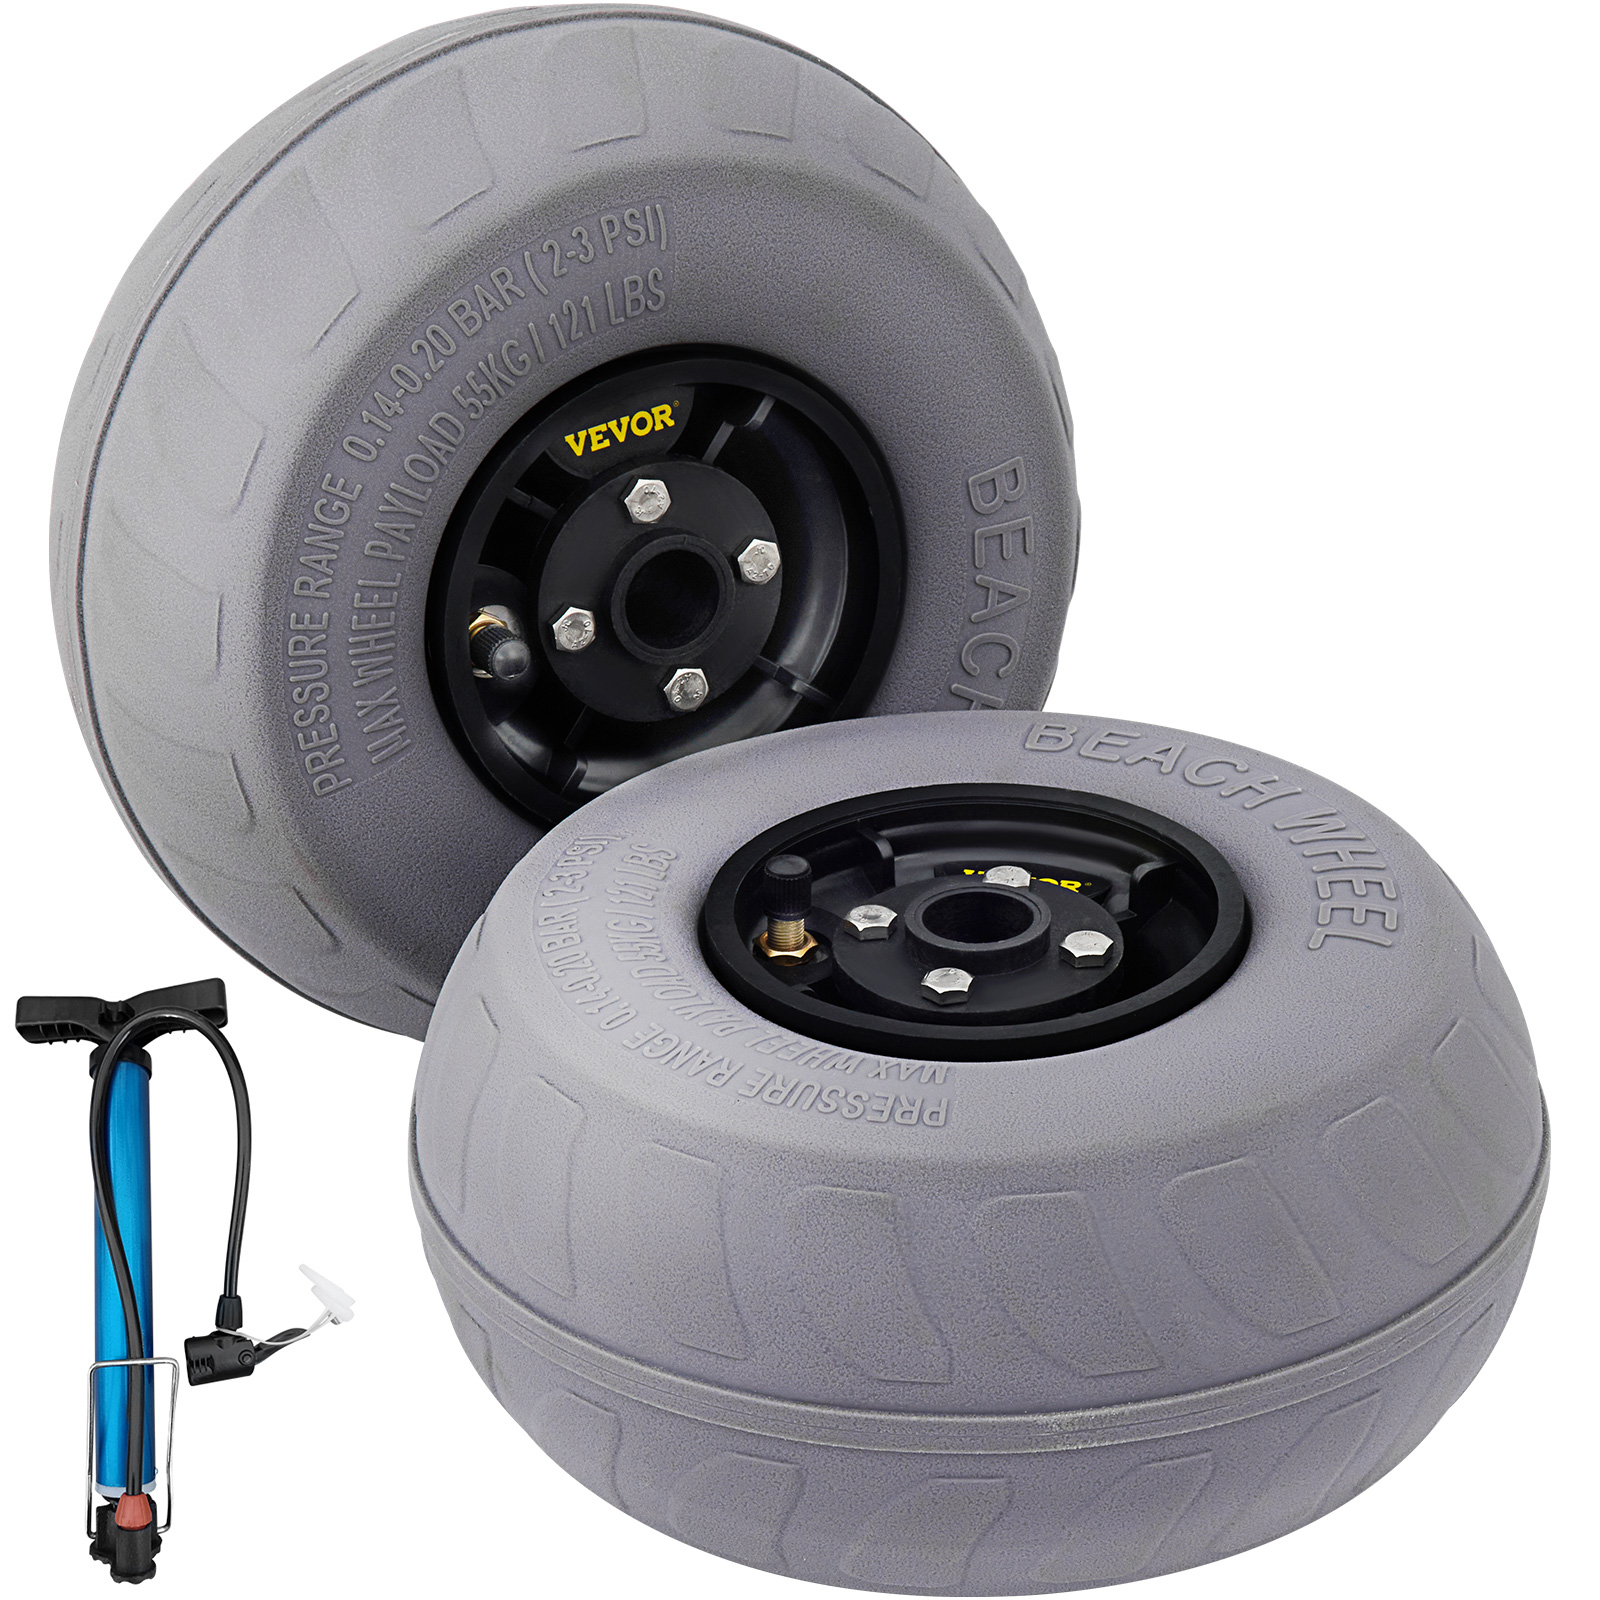 VEVOR Go Kart Tires and Rims, 2pcs Front Tires Rims, Go Cart Wheels and  Tires 10x 4.50 Front, HUB- Rim Fit Bolt Pattern 58 mm/2.28 inch with 3  Holes for Go Kart